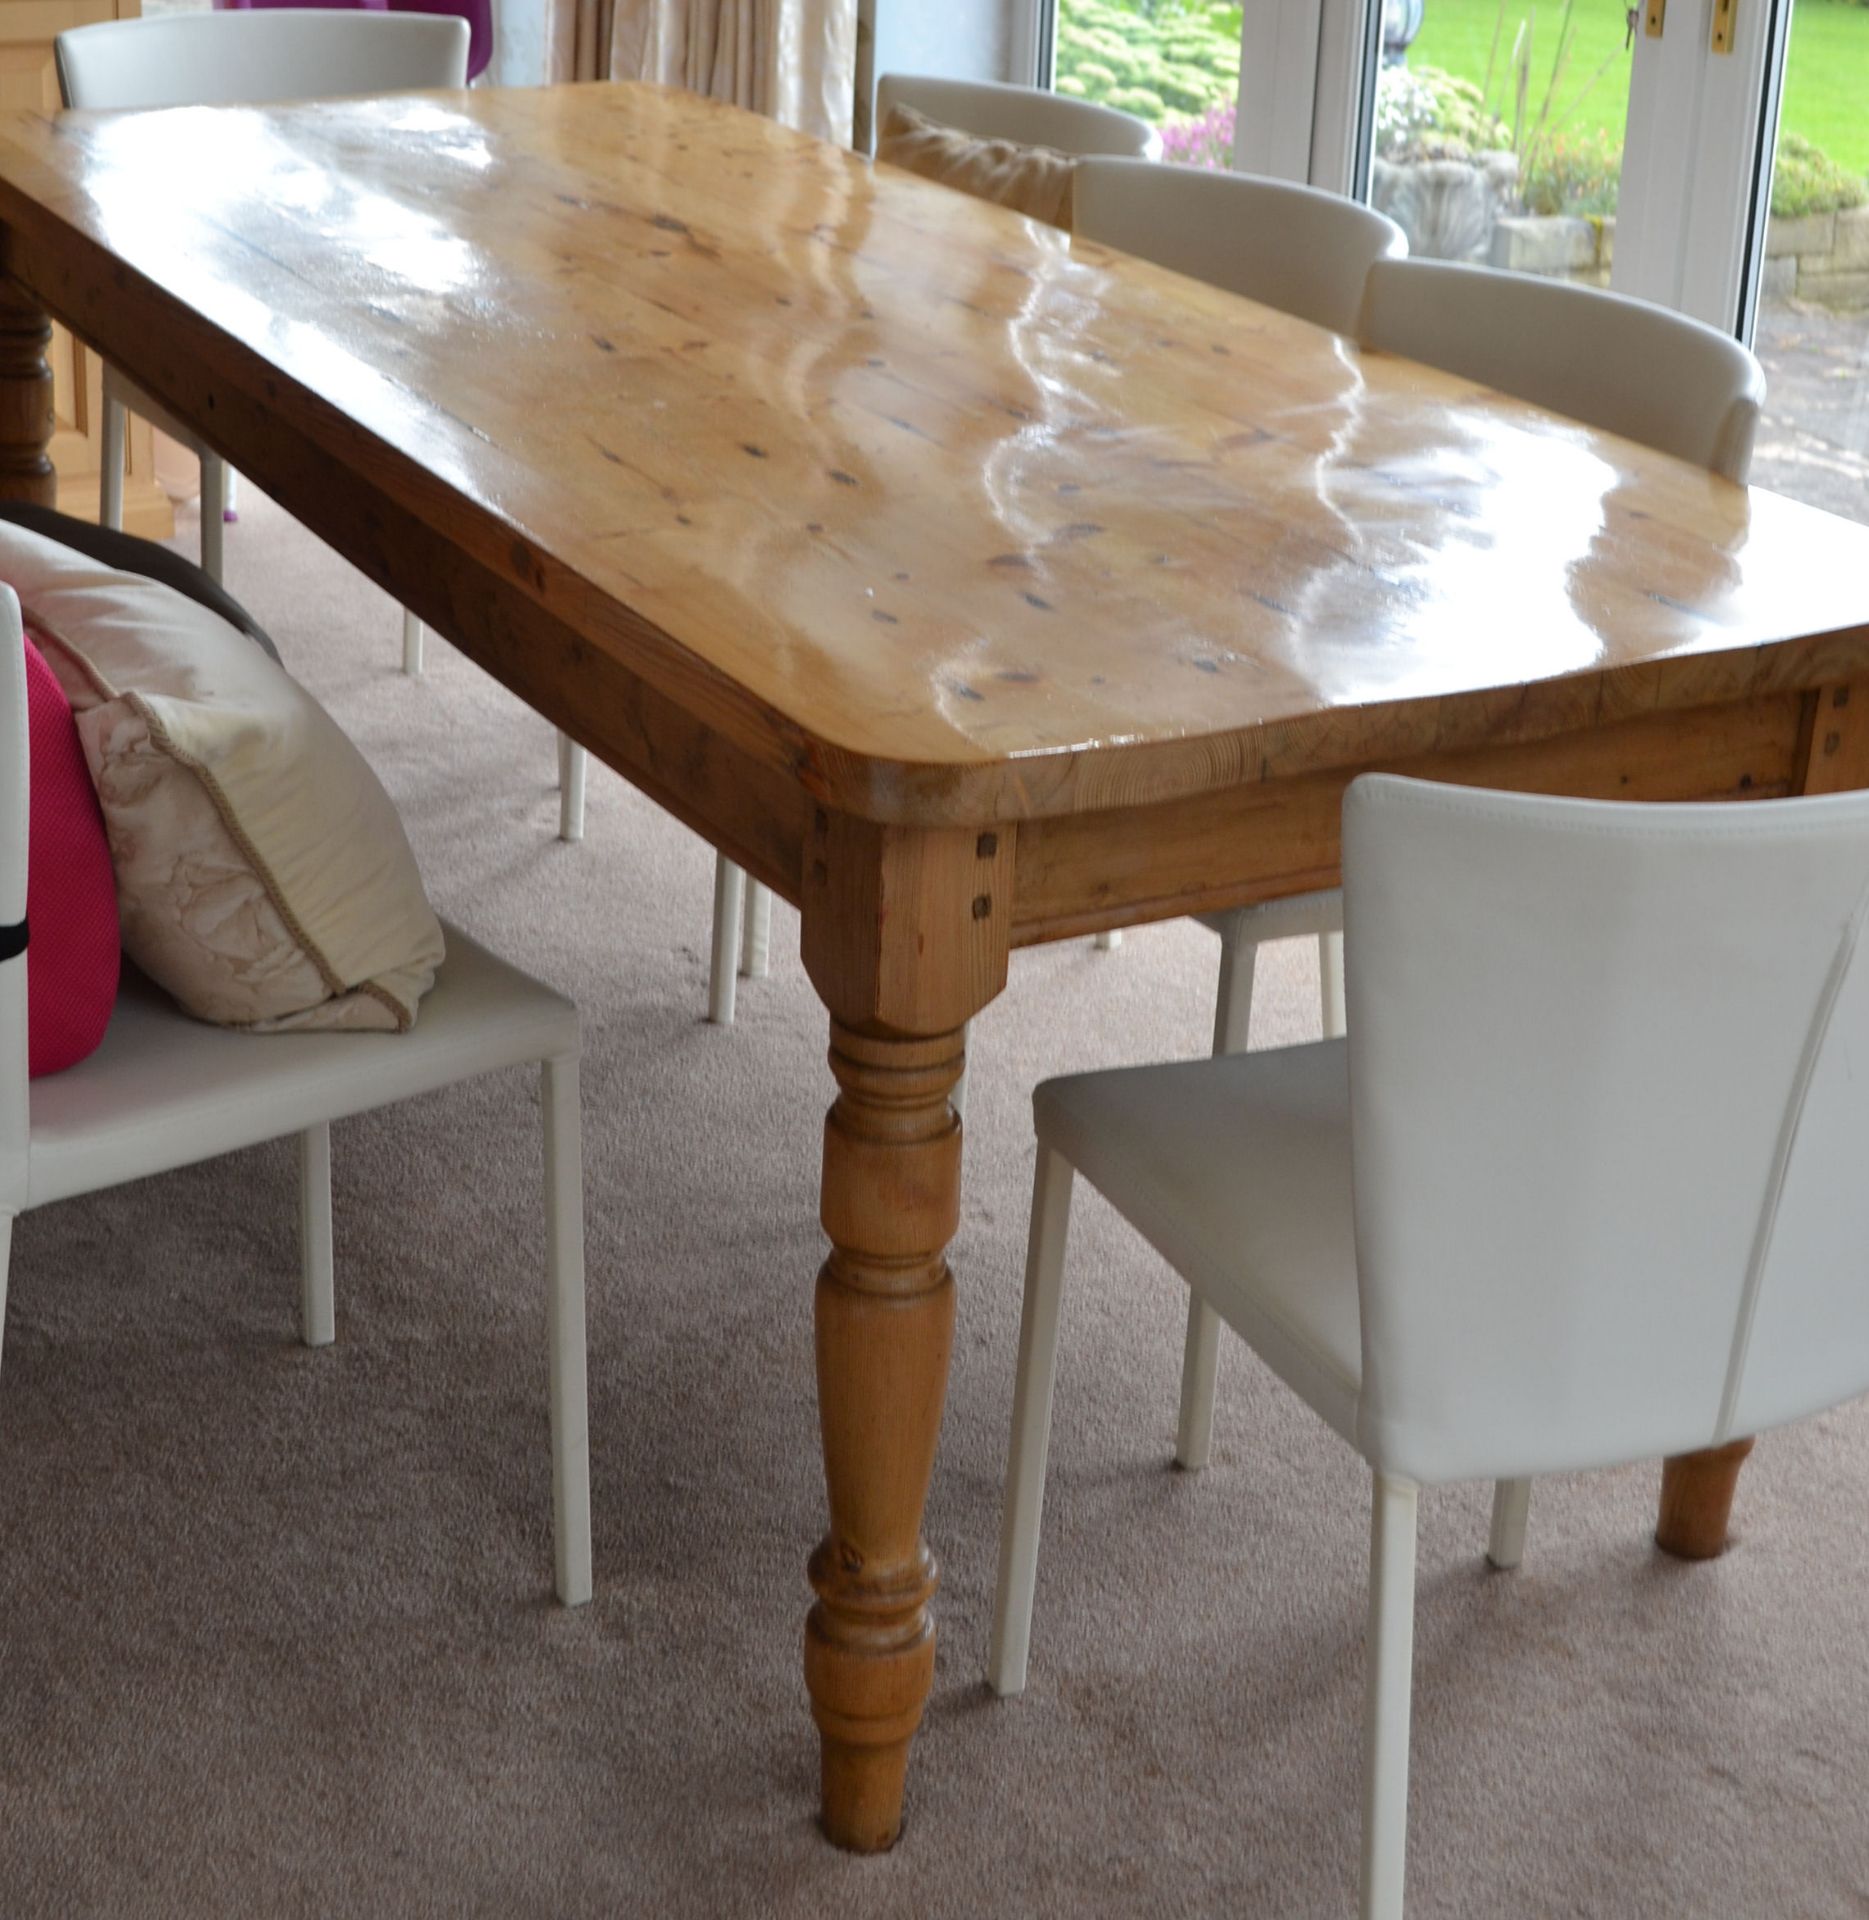 1 x Bespoke Pine Dining Table Made From Reclaimed Church Pews - CL226 - Location: Knutsford WA16 - Image 3 of 9